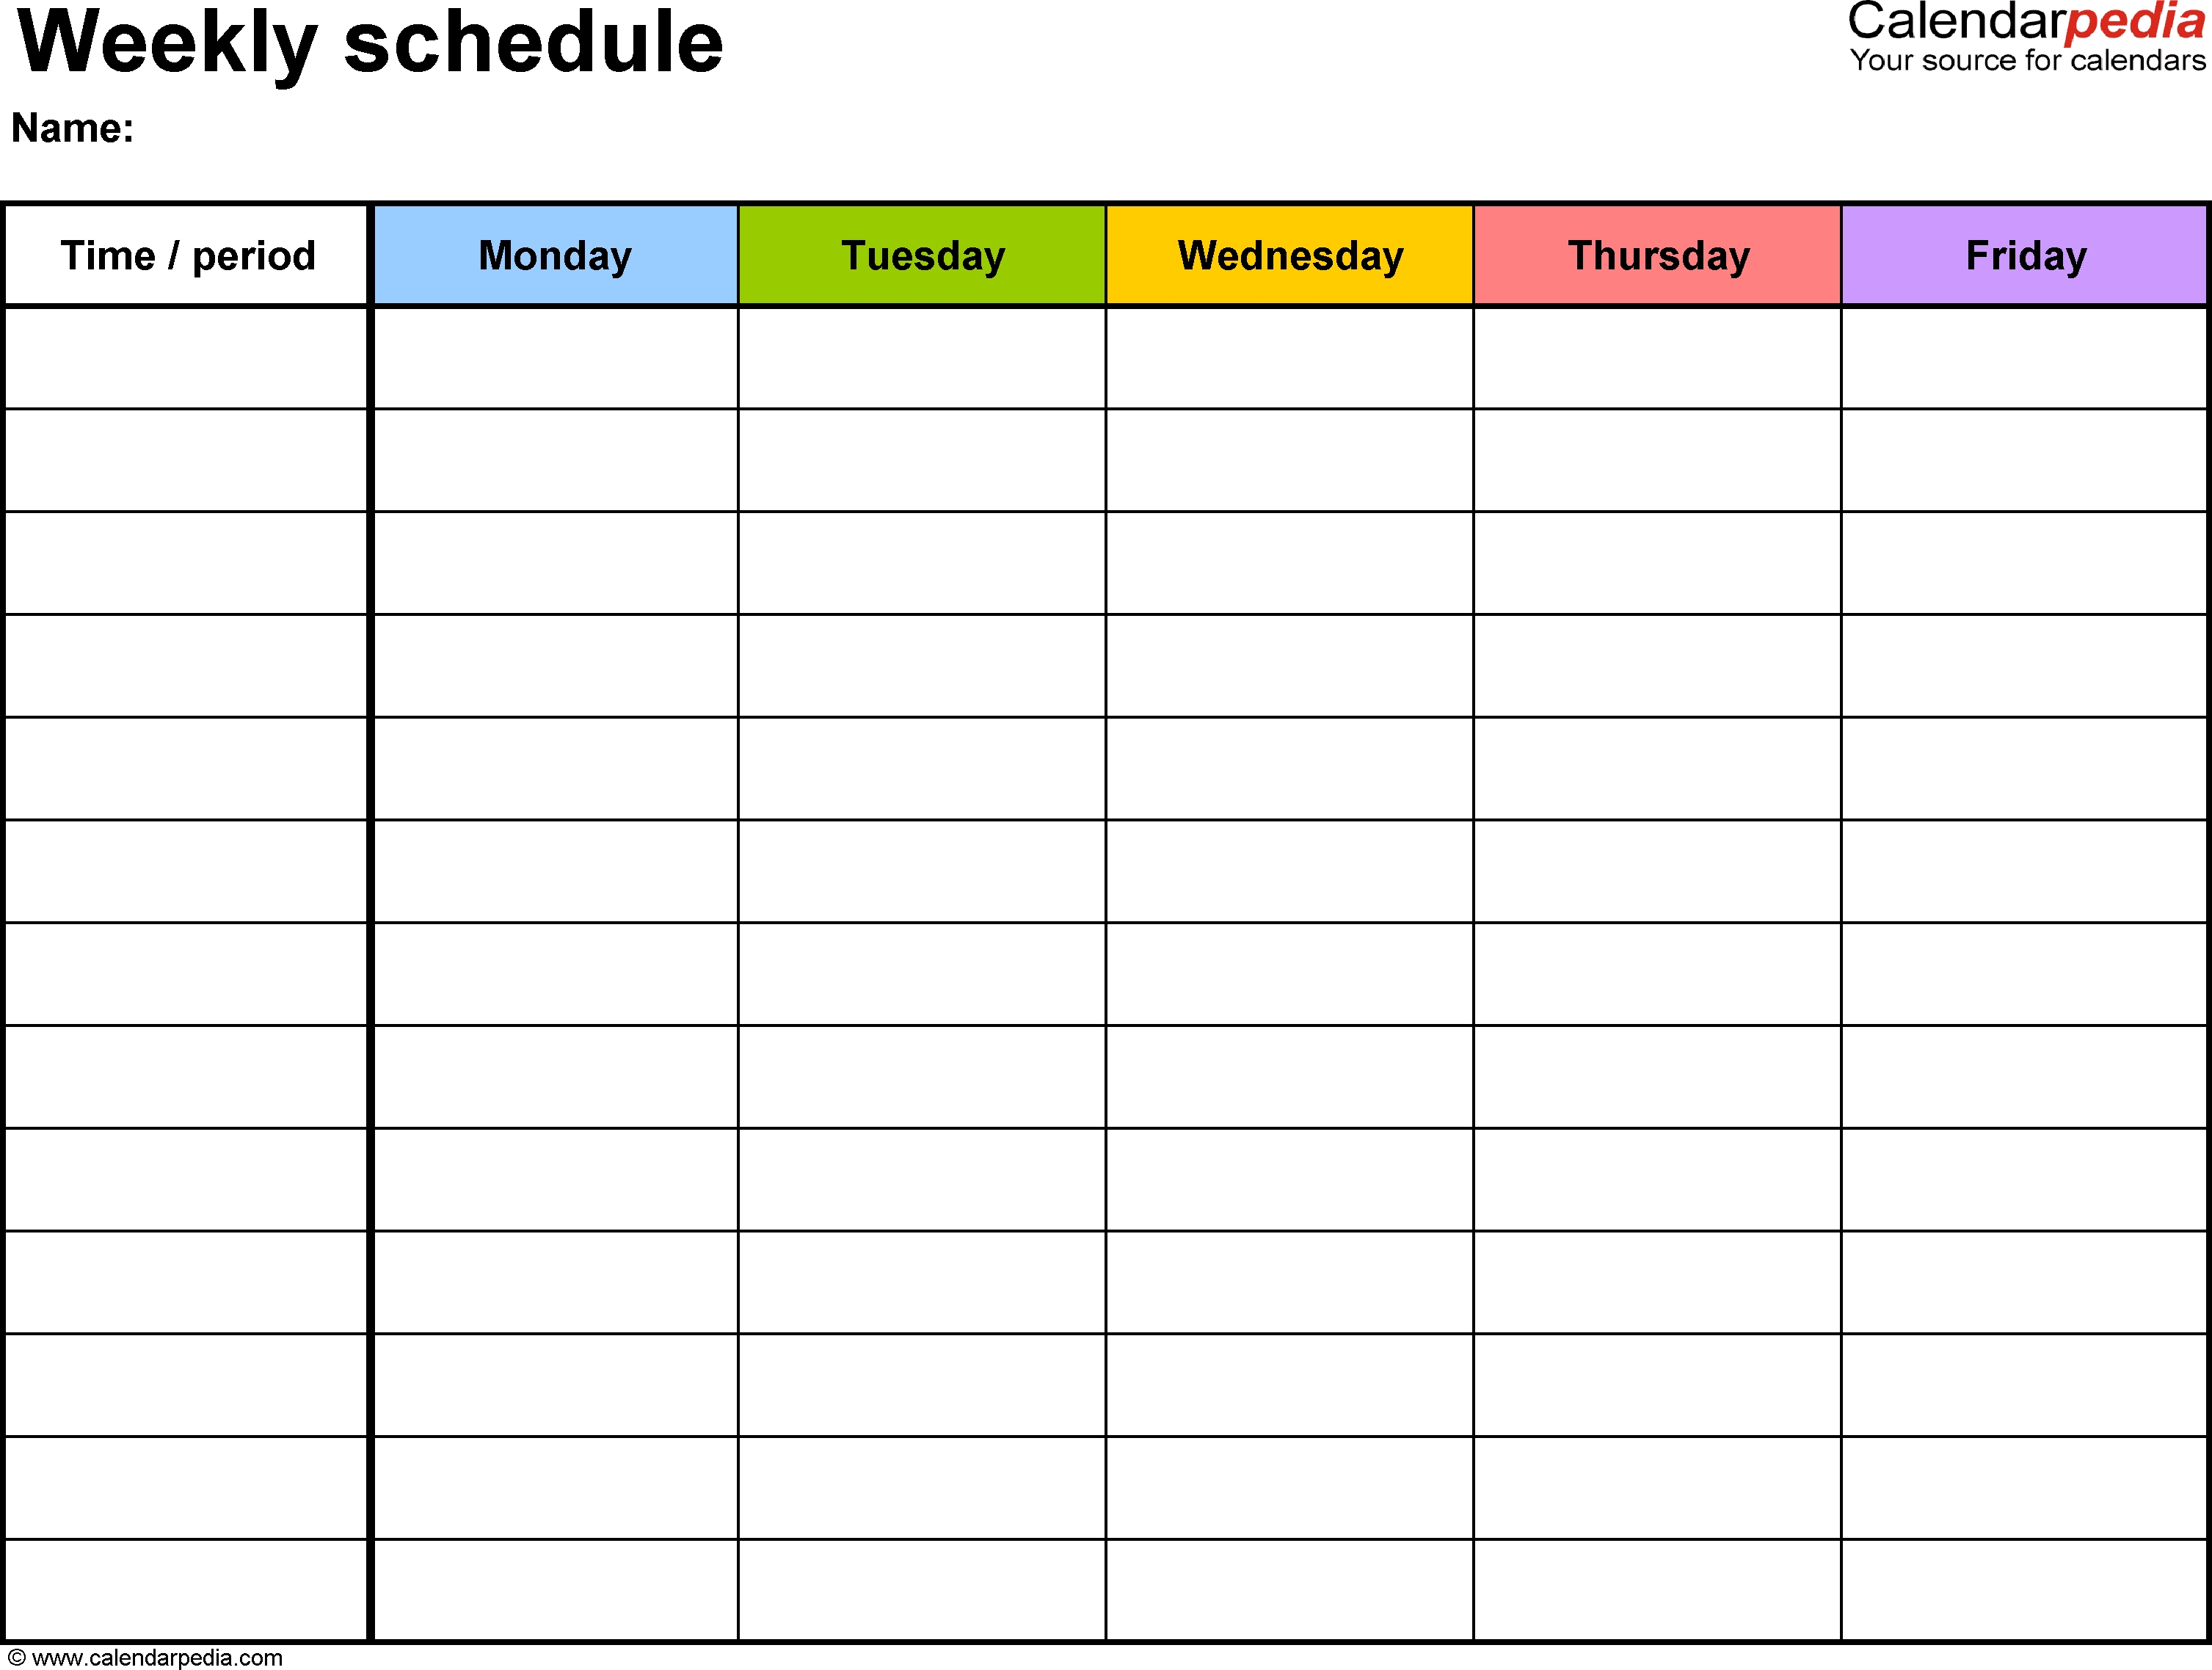 Weekly Schedule Template For Word Version 1: Landscape, 1-Monday Through Friday Calendar Template